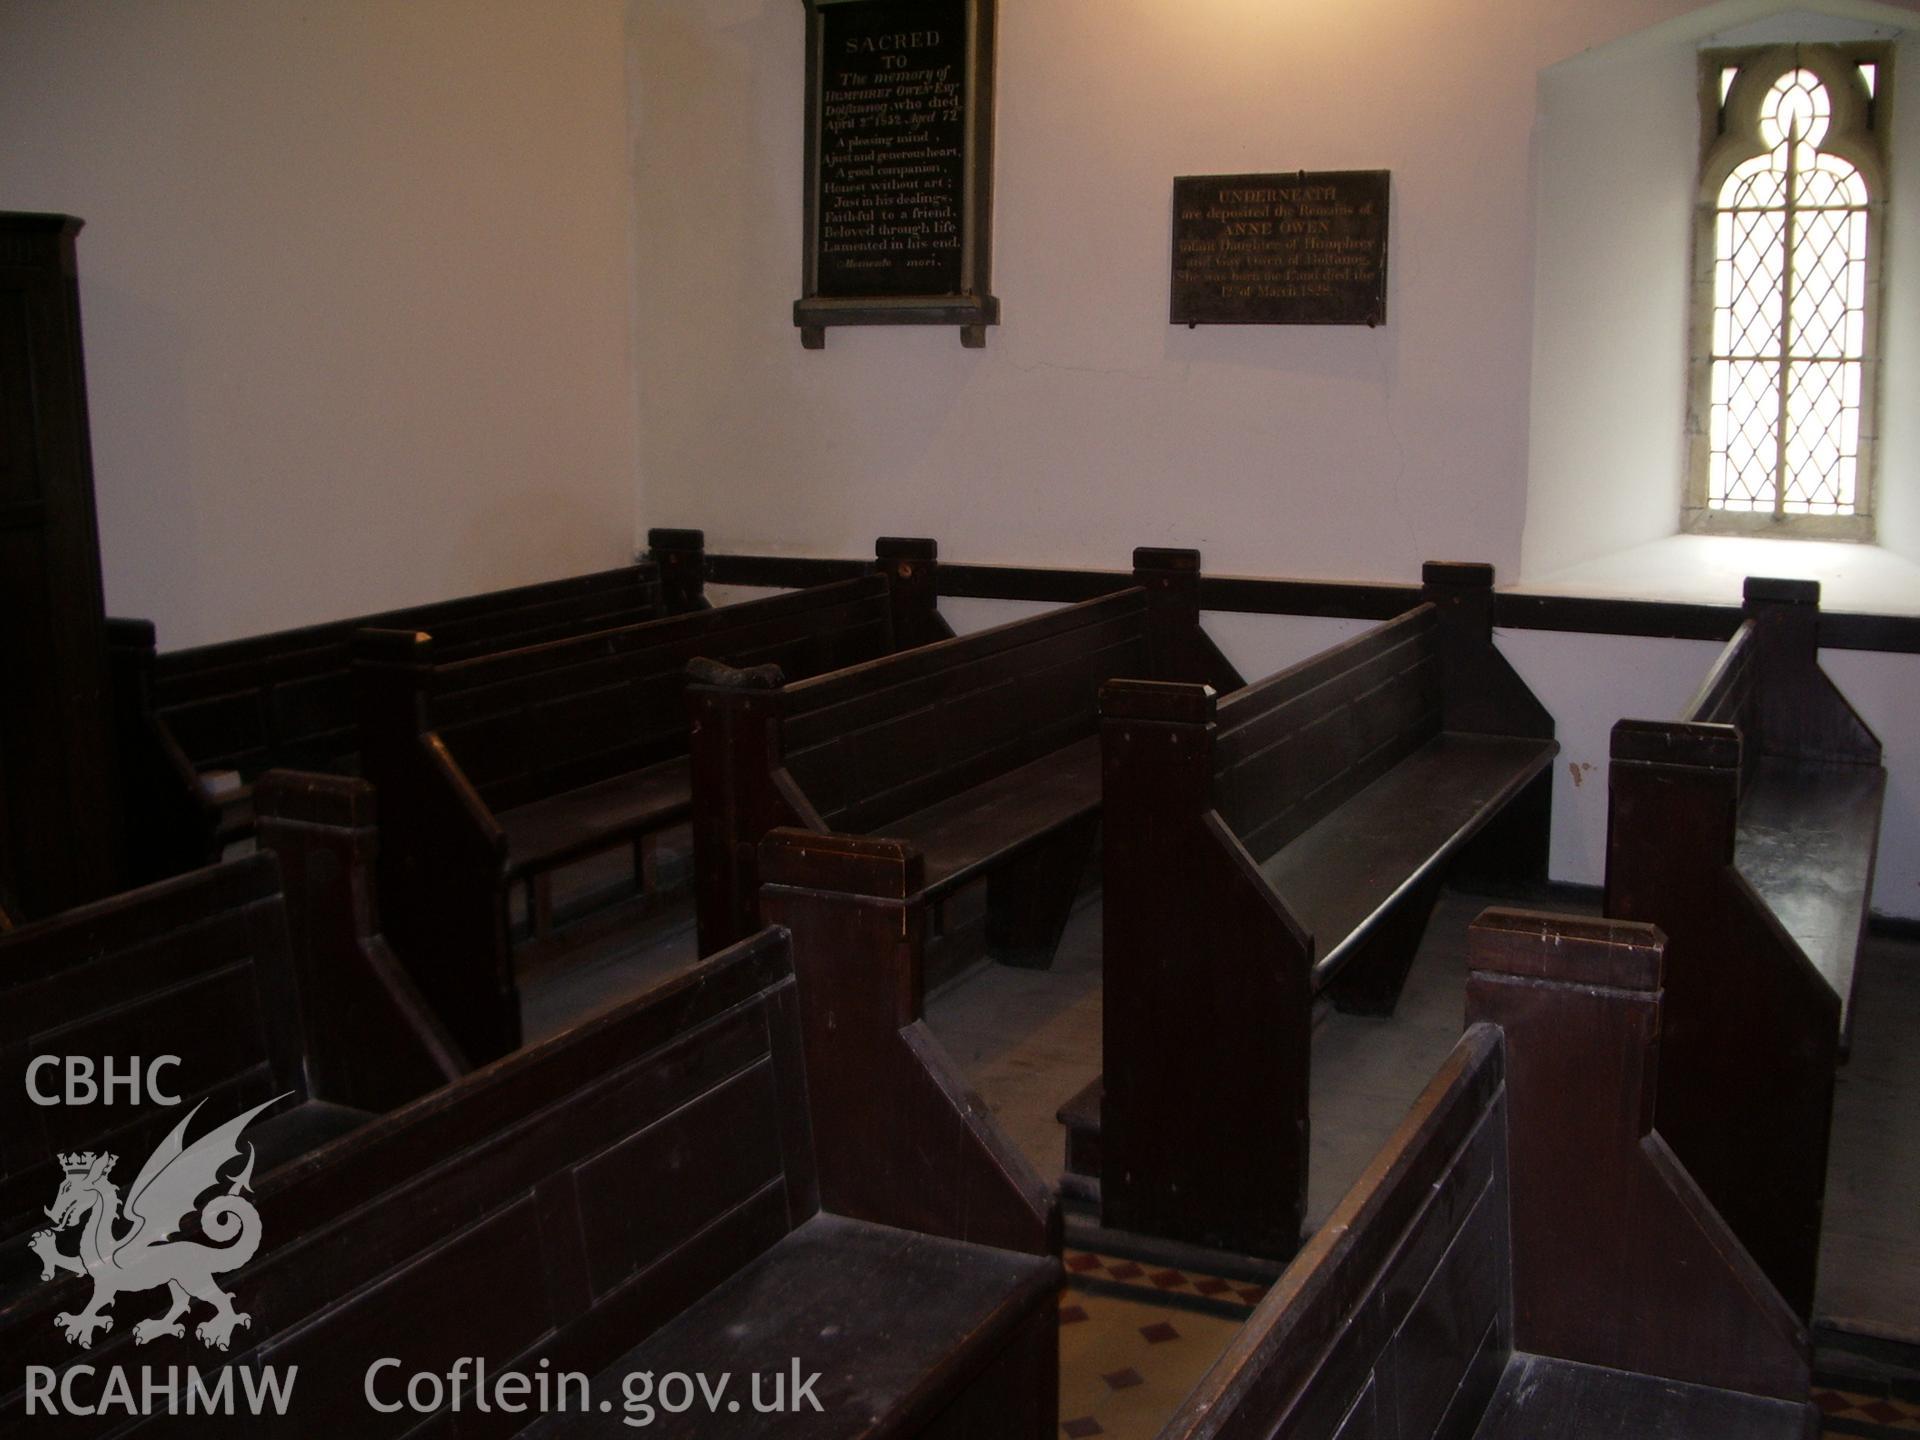 Interior view of the church showing the pews.